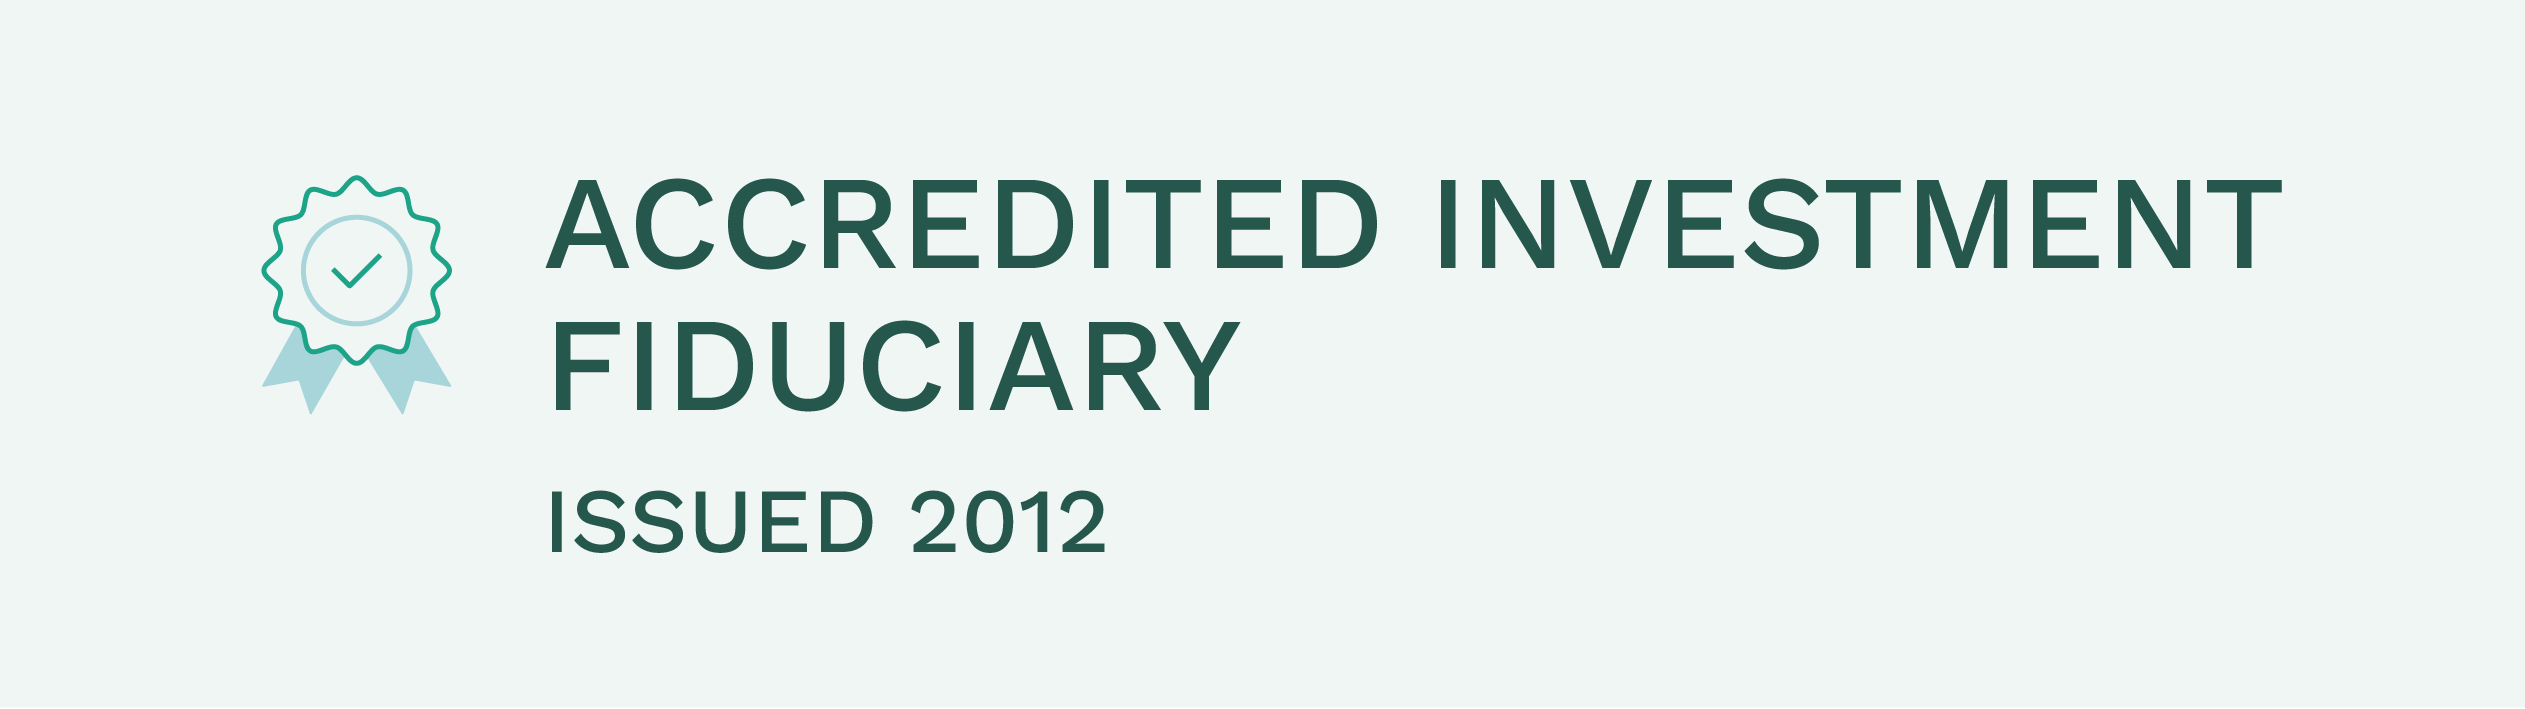 Accredited Investment Fiduciary 2012